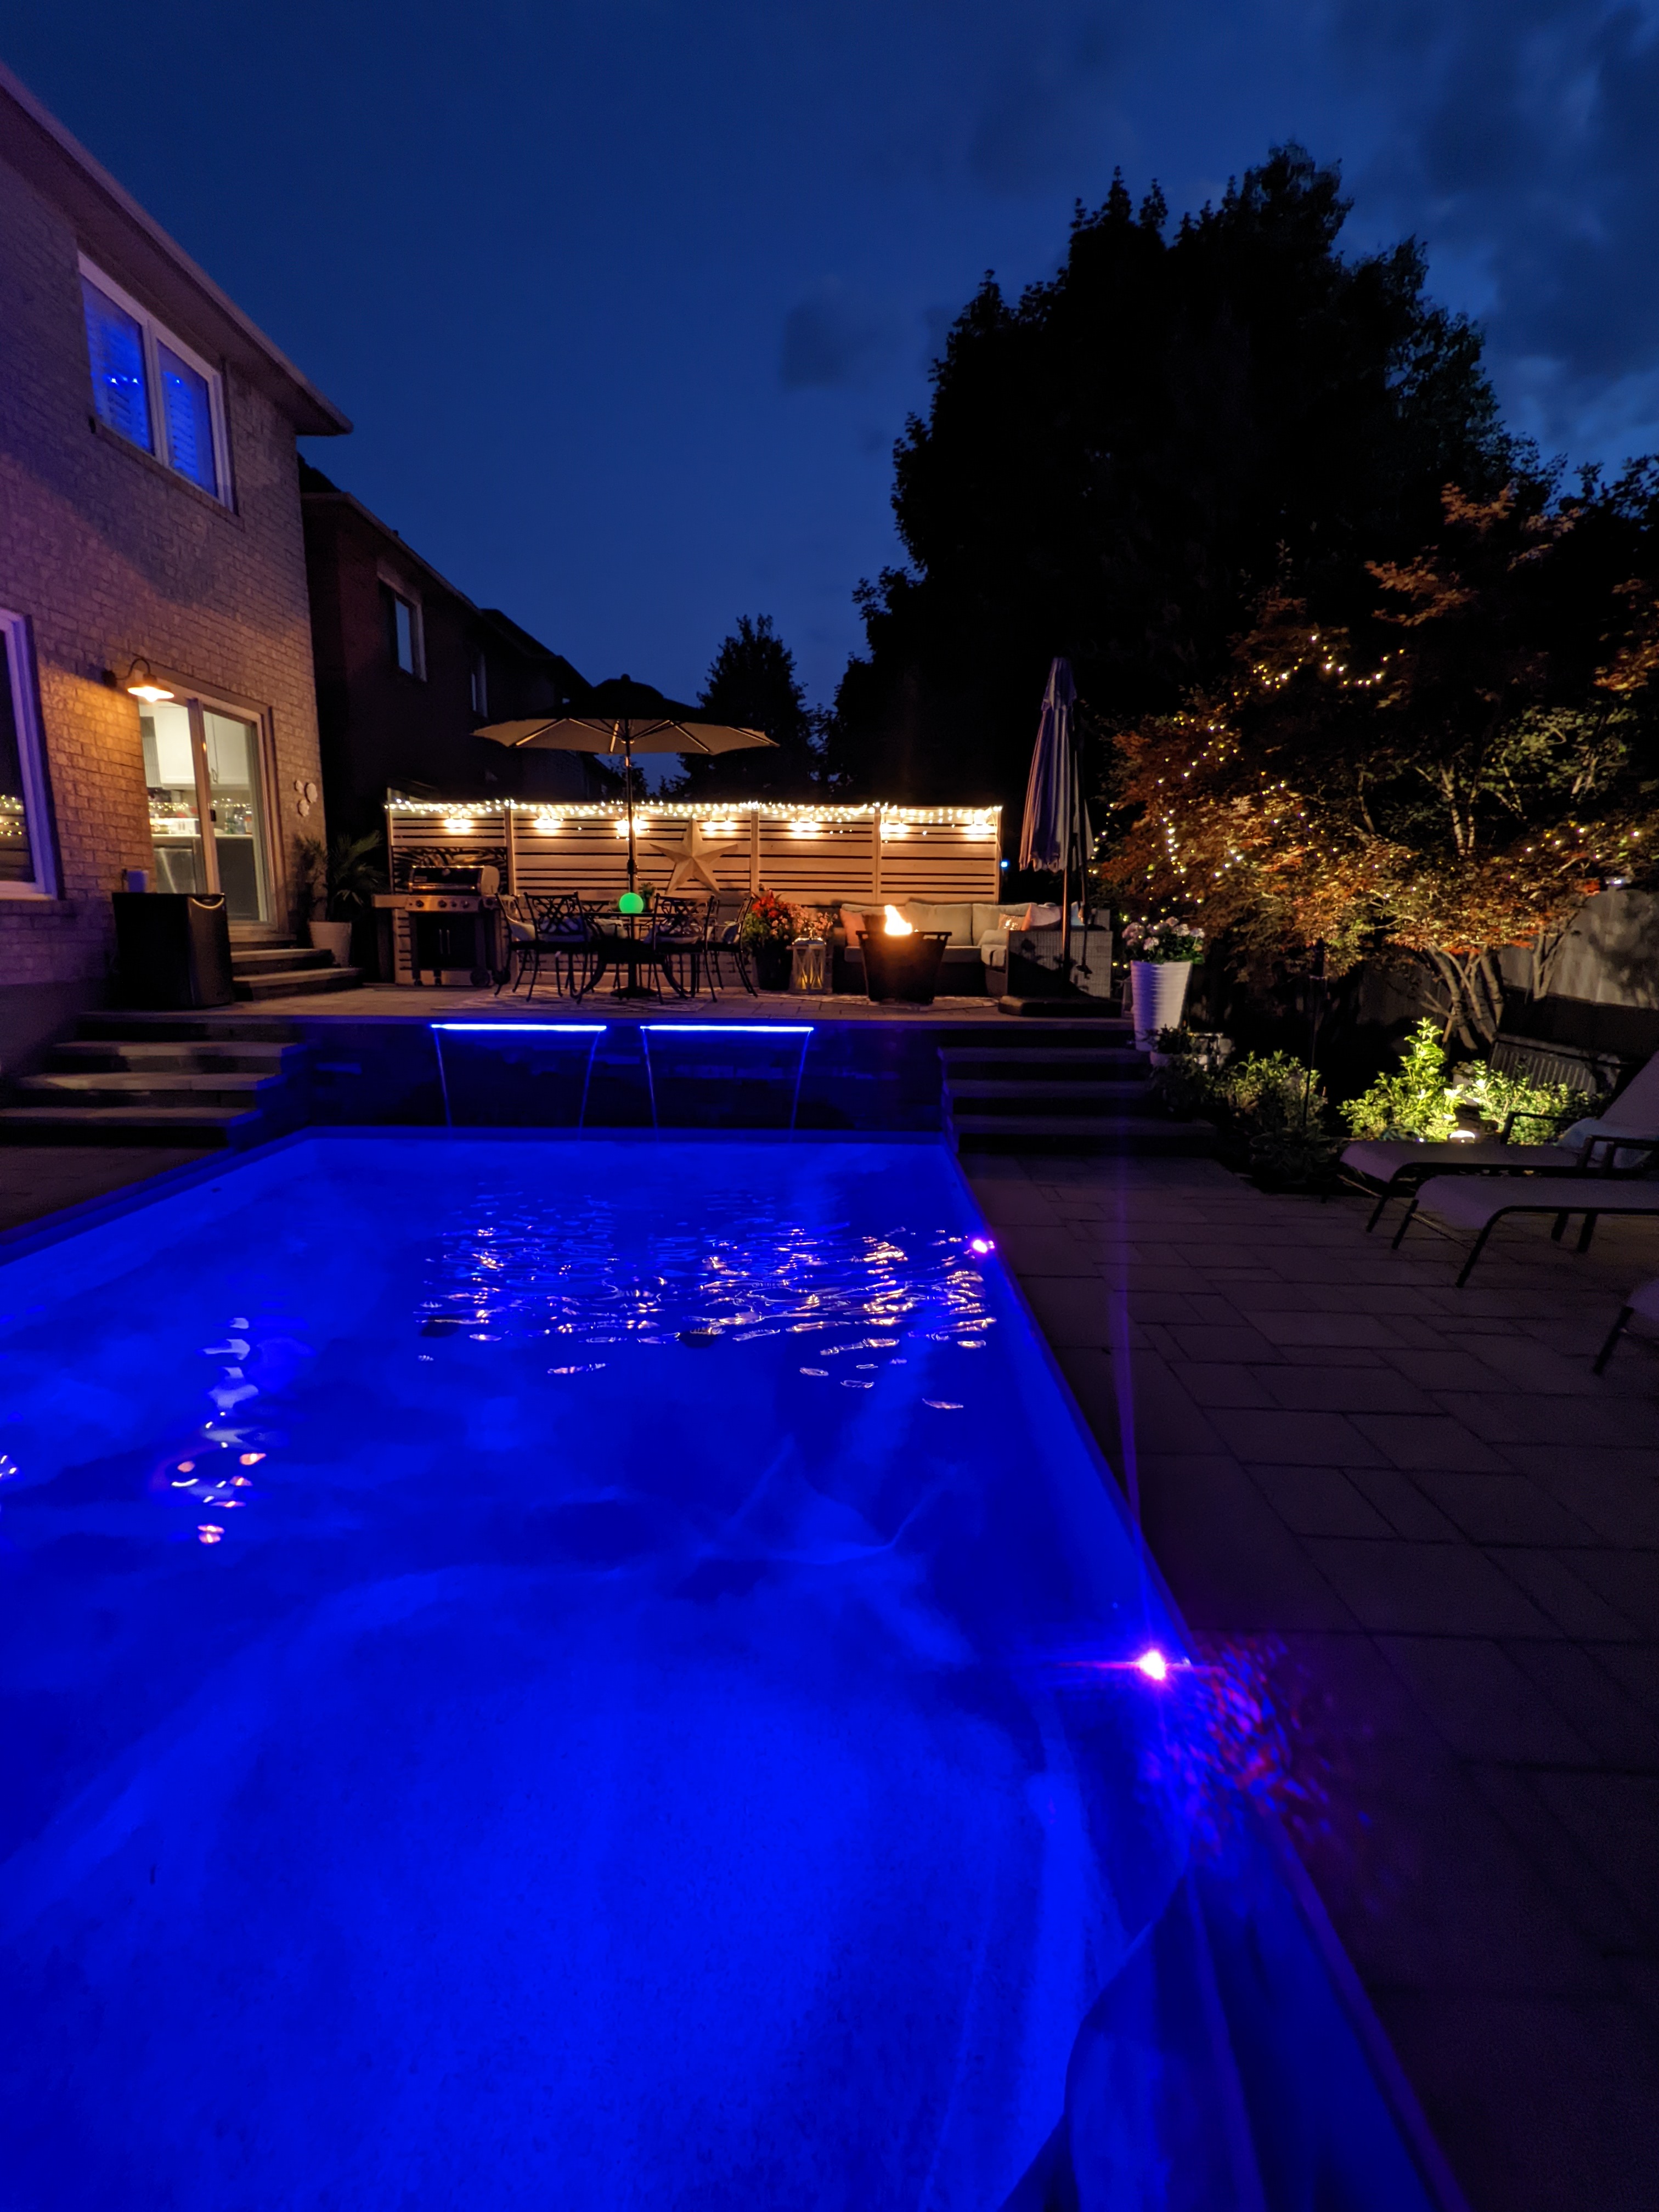 Choosing the right pool and landscape contractor